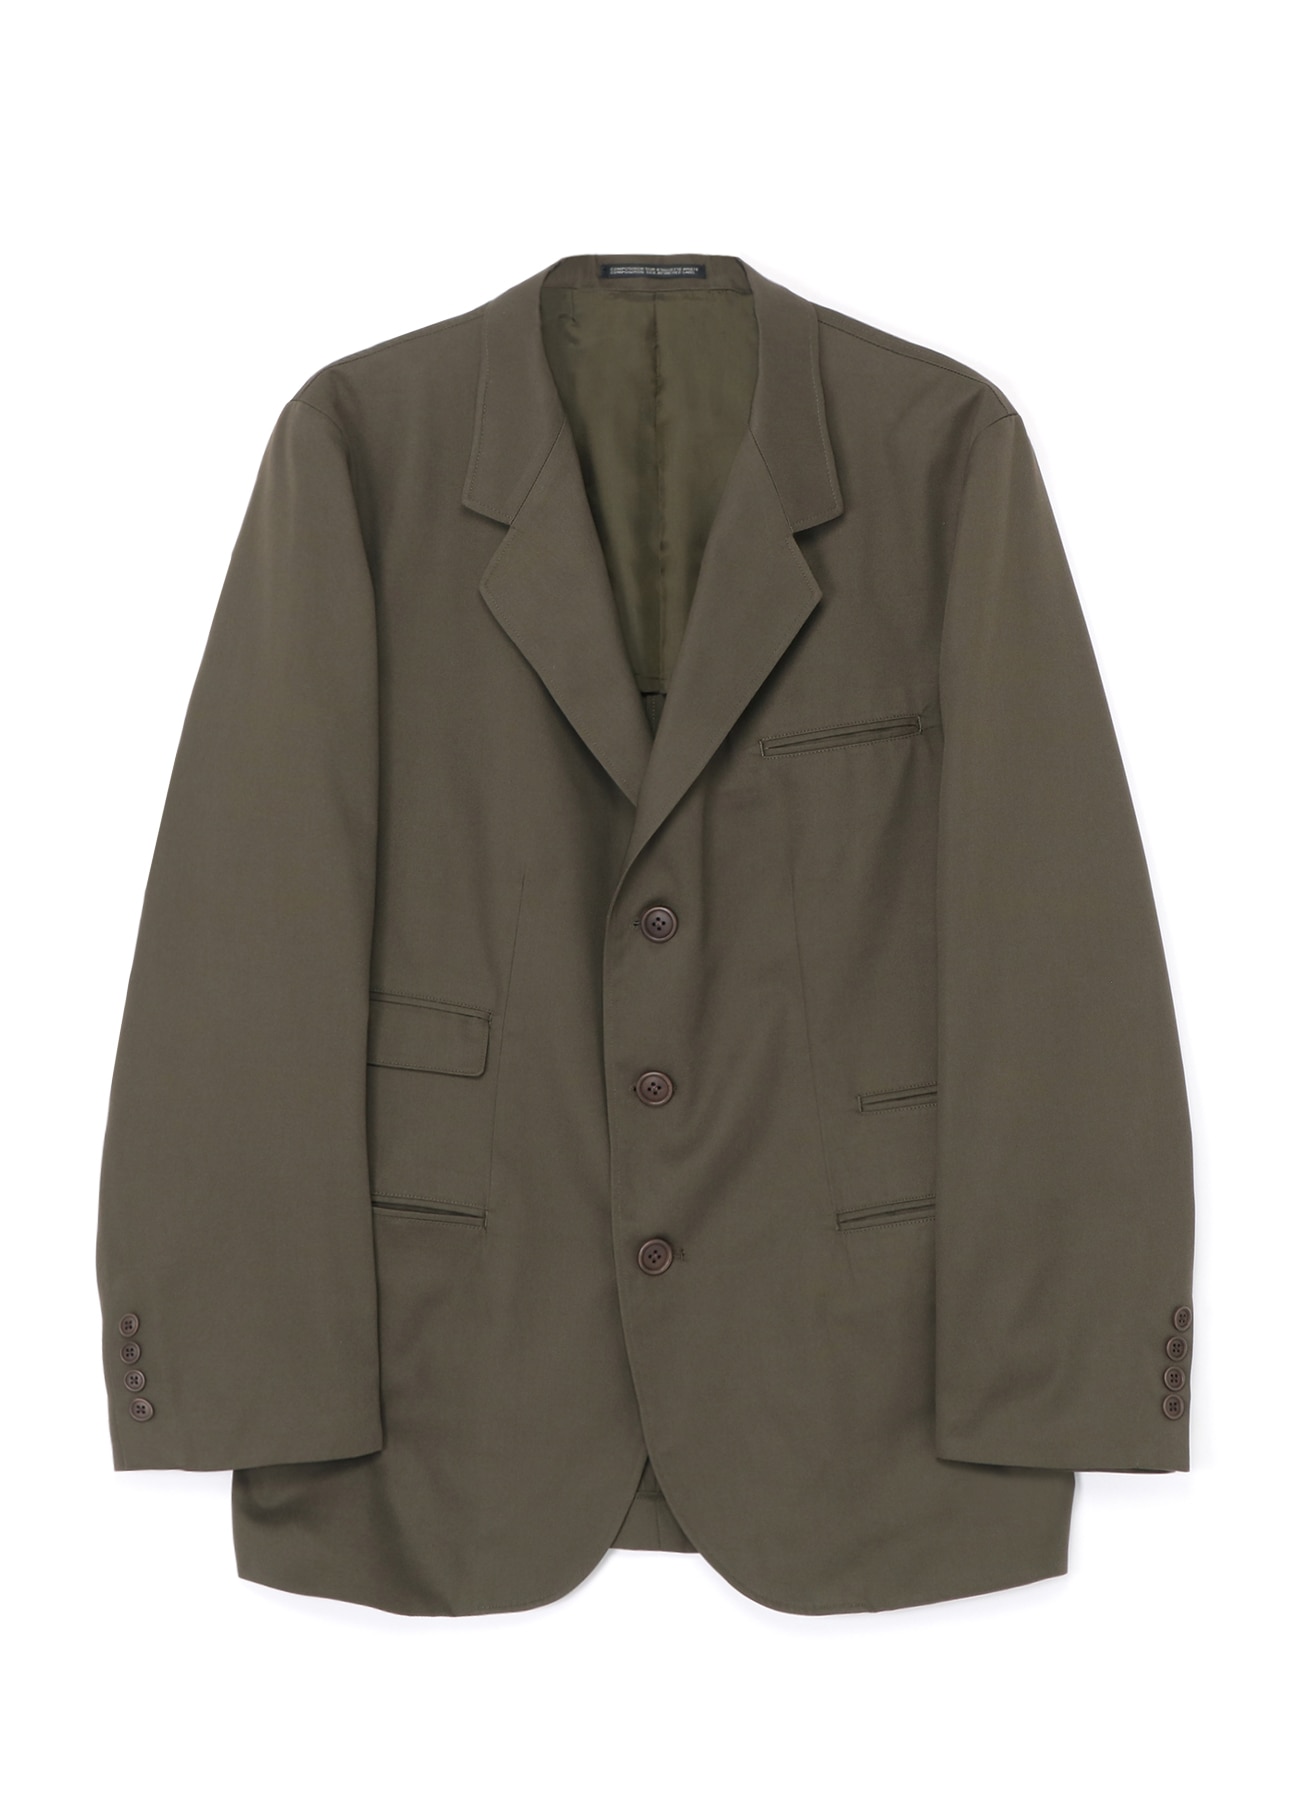 COTTON/POLYESTER TWILL 3-BUTTON JACKET